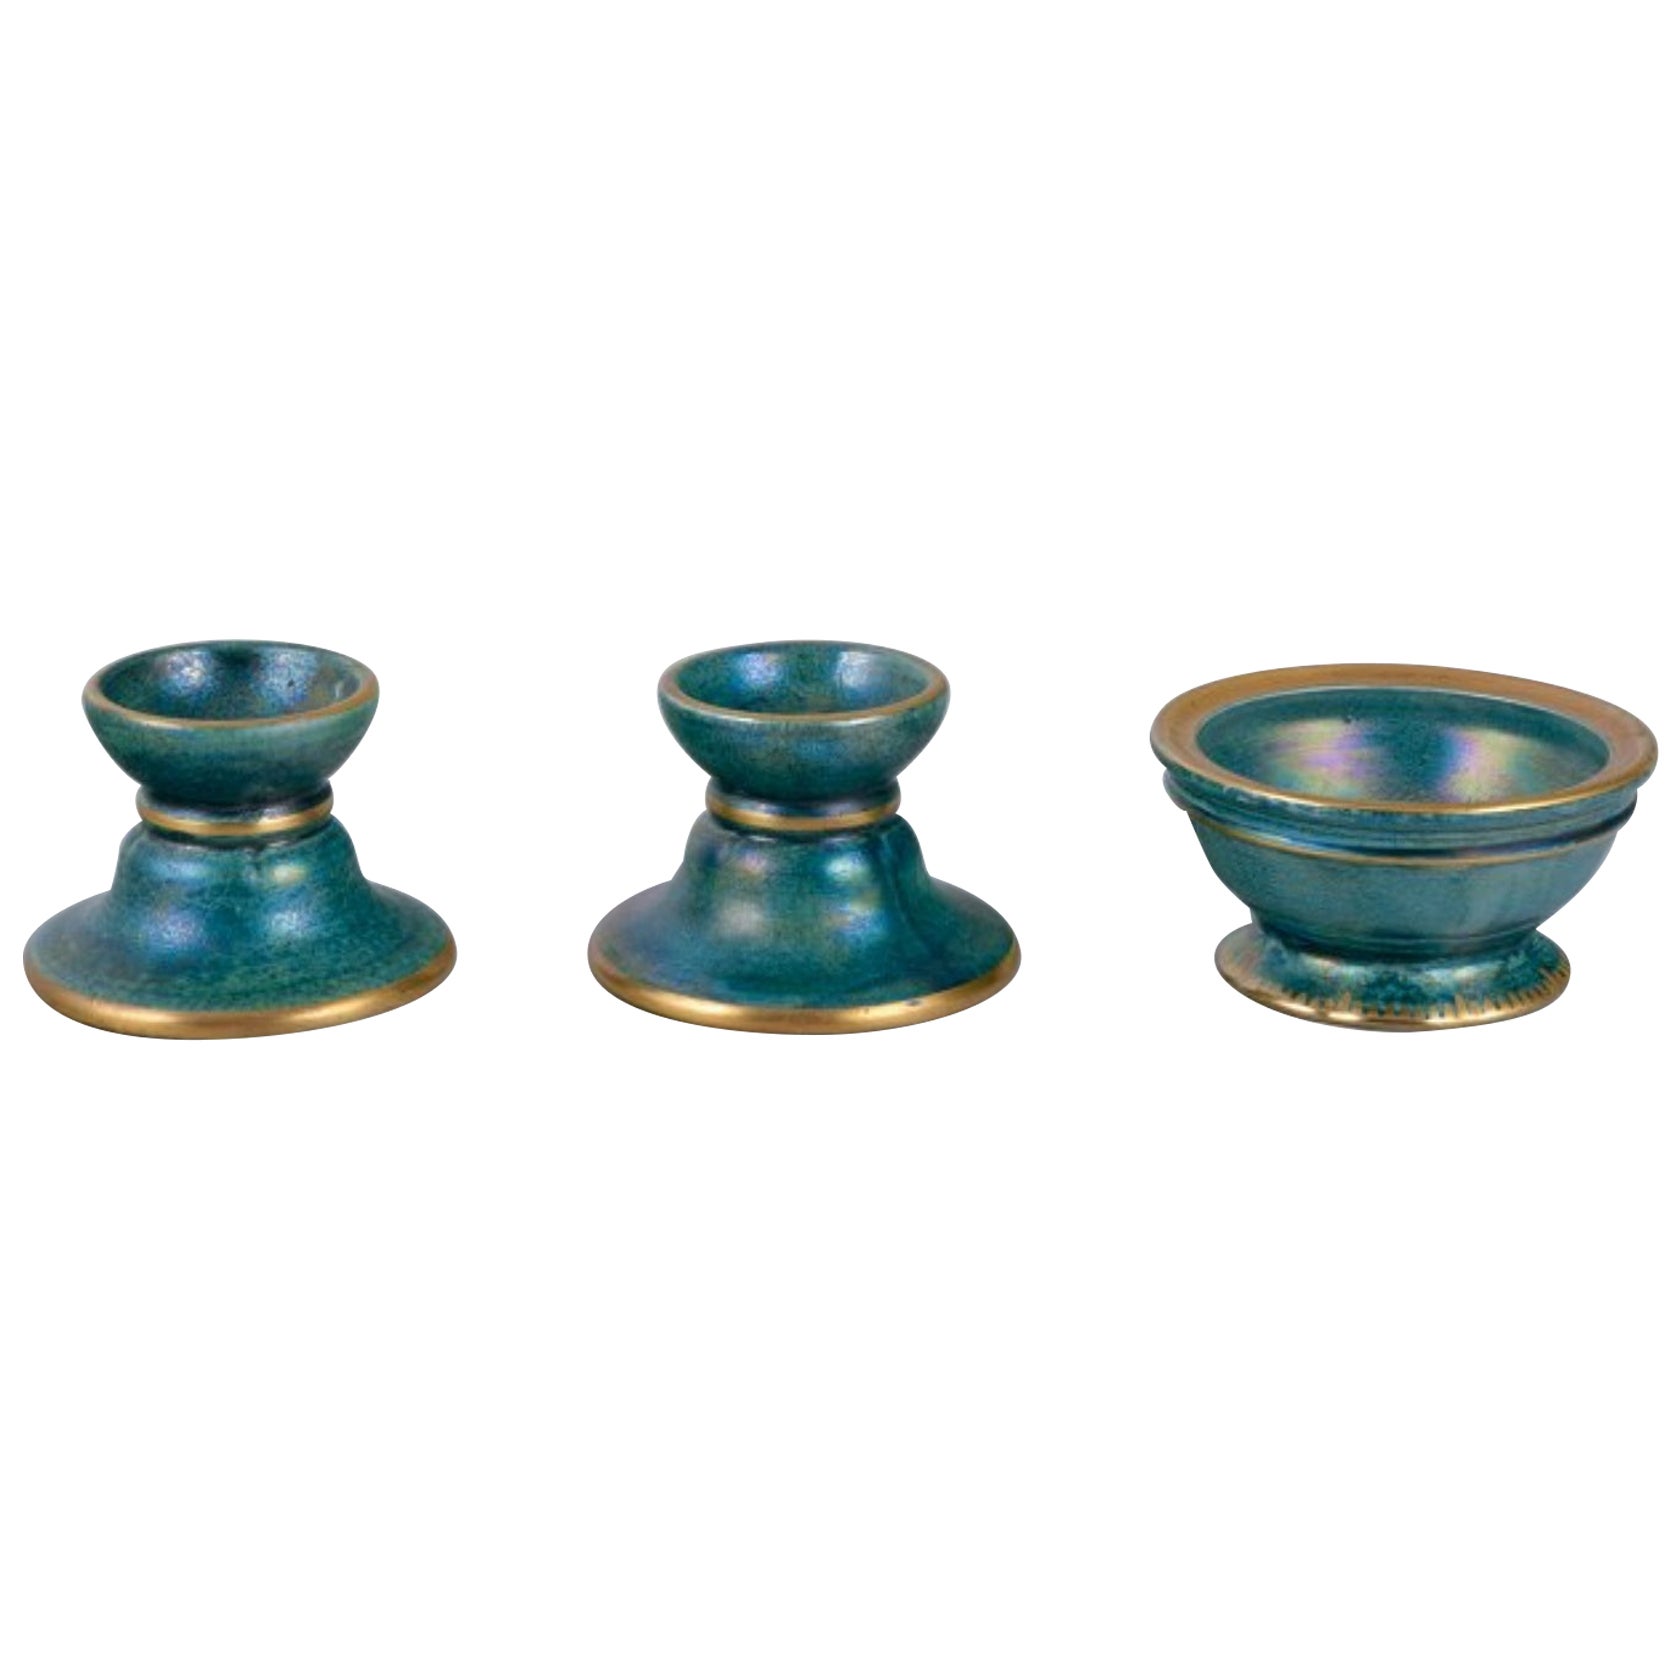 Josef Ekberg for Gustavsberg. Pair of candle holders and small bowl in ceramic. For Sale